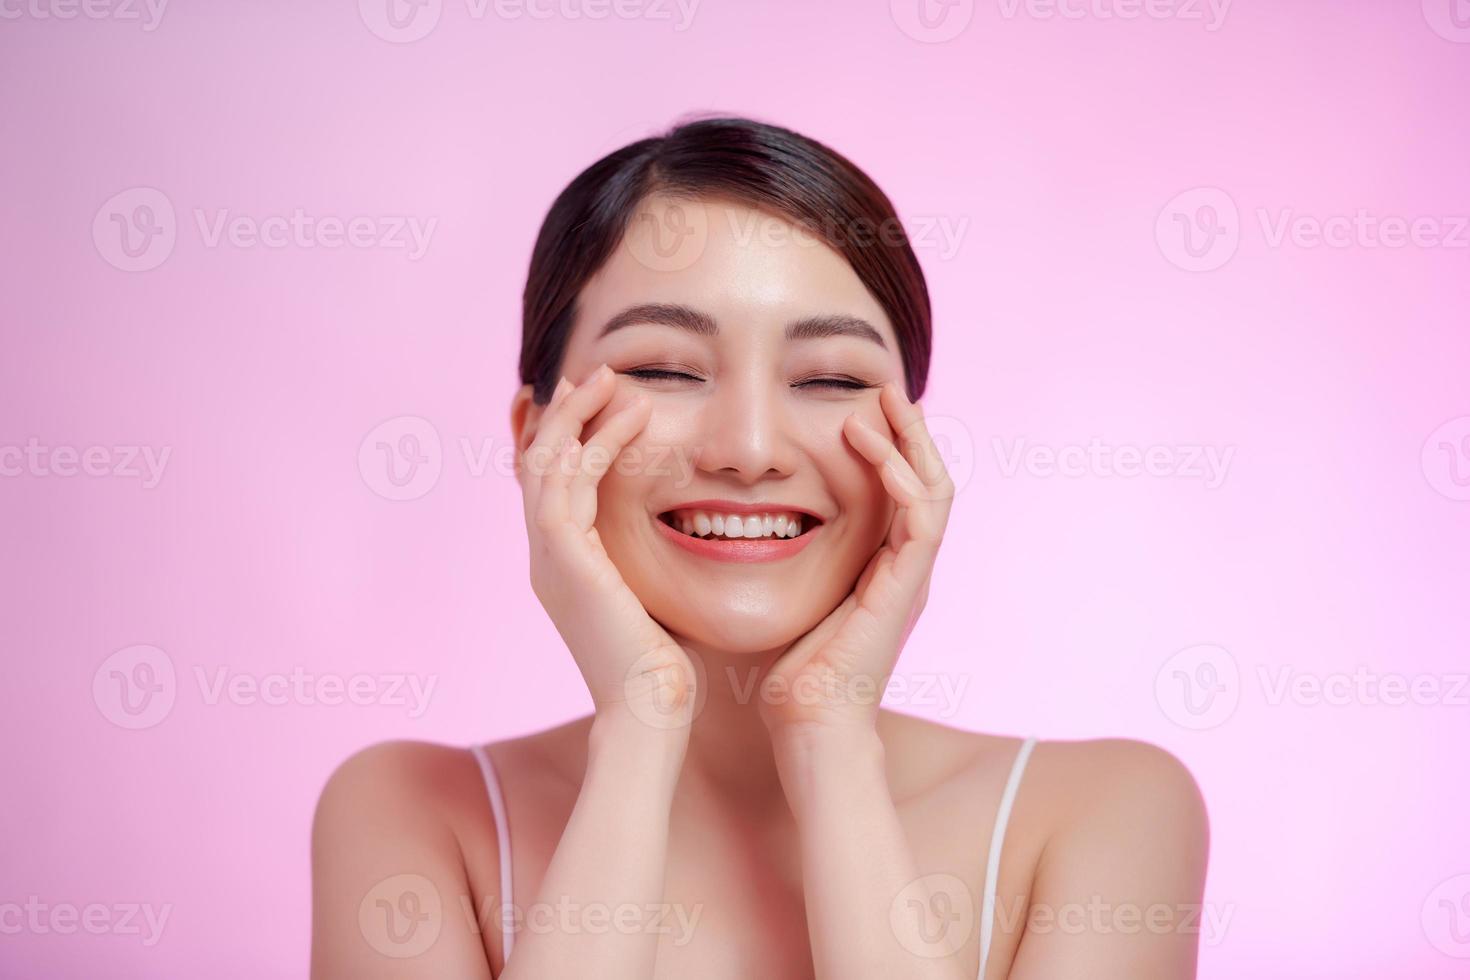 Natural woman beauty clean skin beautiful female cosmetic concept face portrait photo